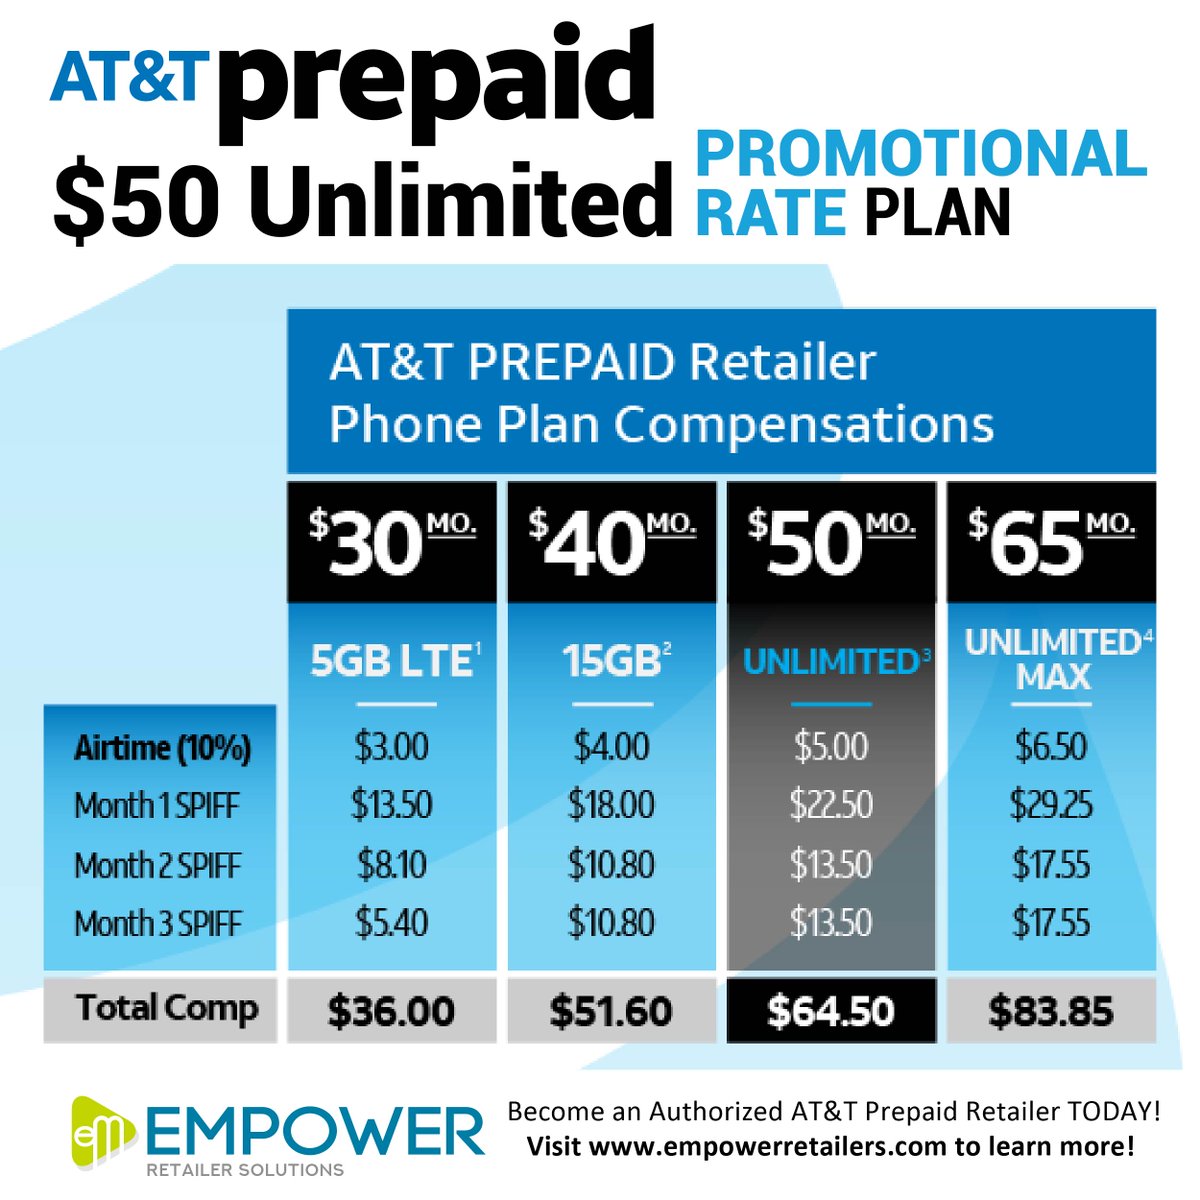 #ATTPrepaid has everything your customers are looking for! Sign up to become an Authorized Retailer TODAY! Click here to get started-> bit.ly/3nrGn3G #WirelessDealer #Prepaid #Wireless